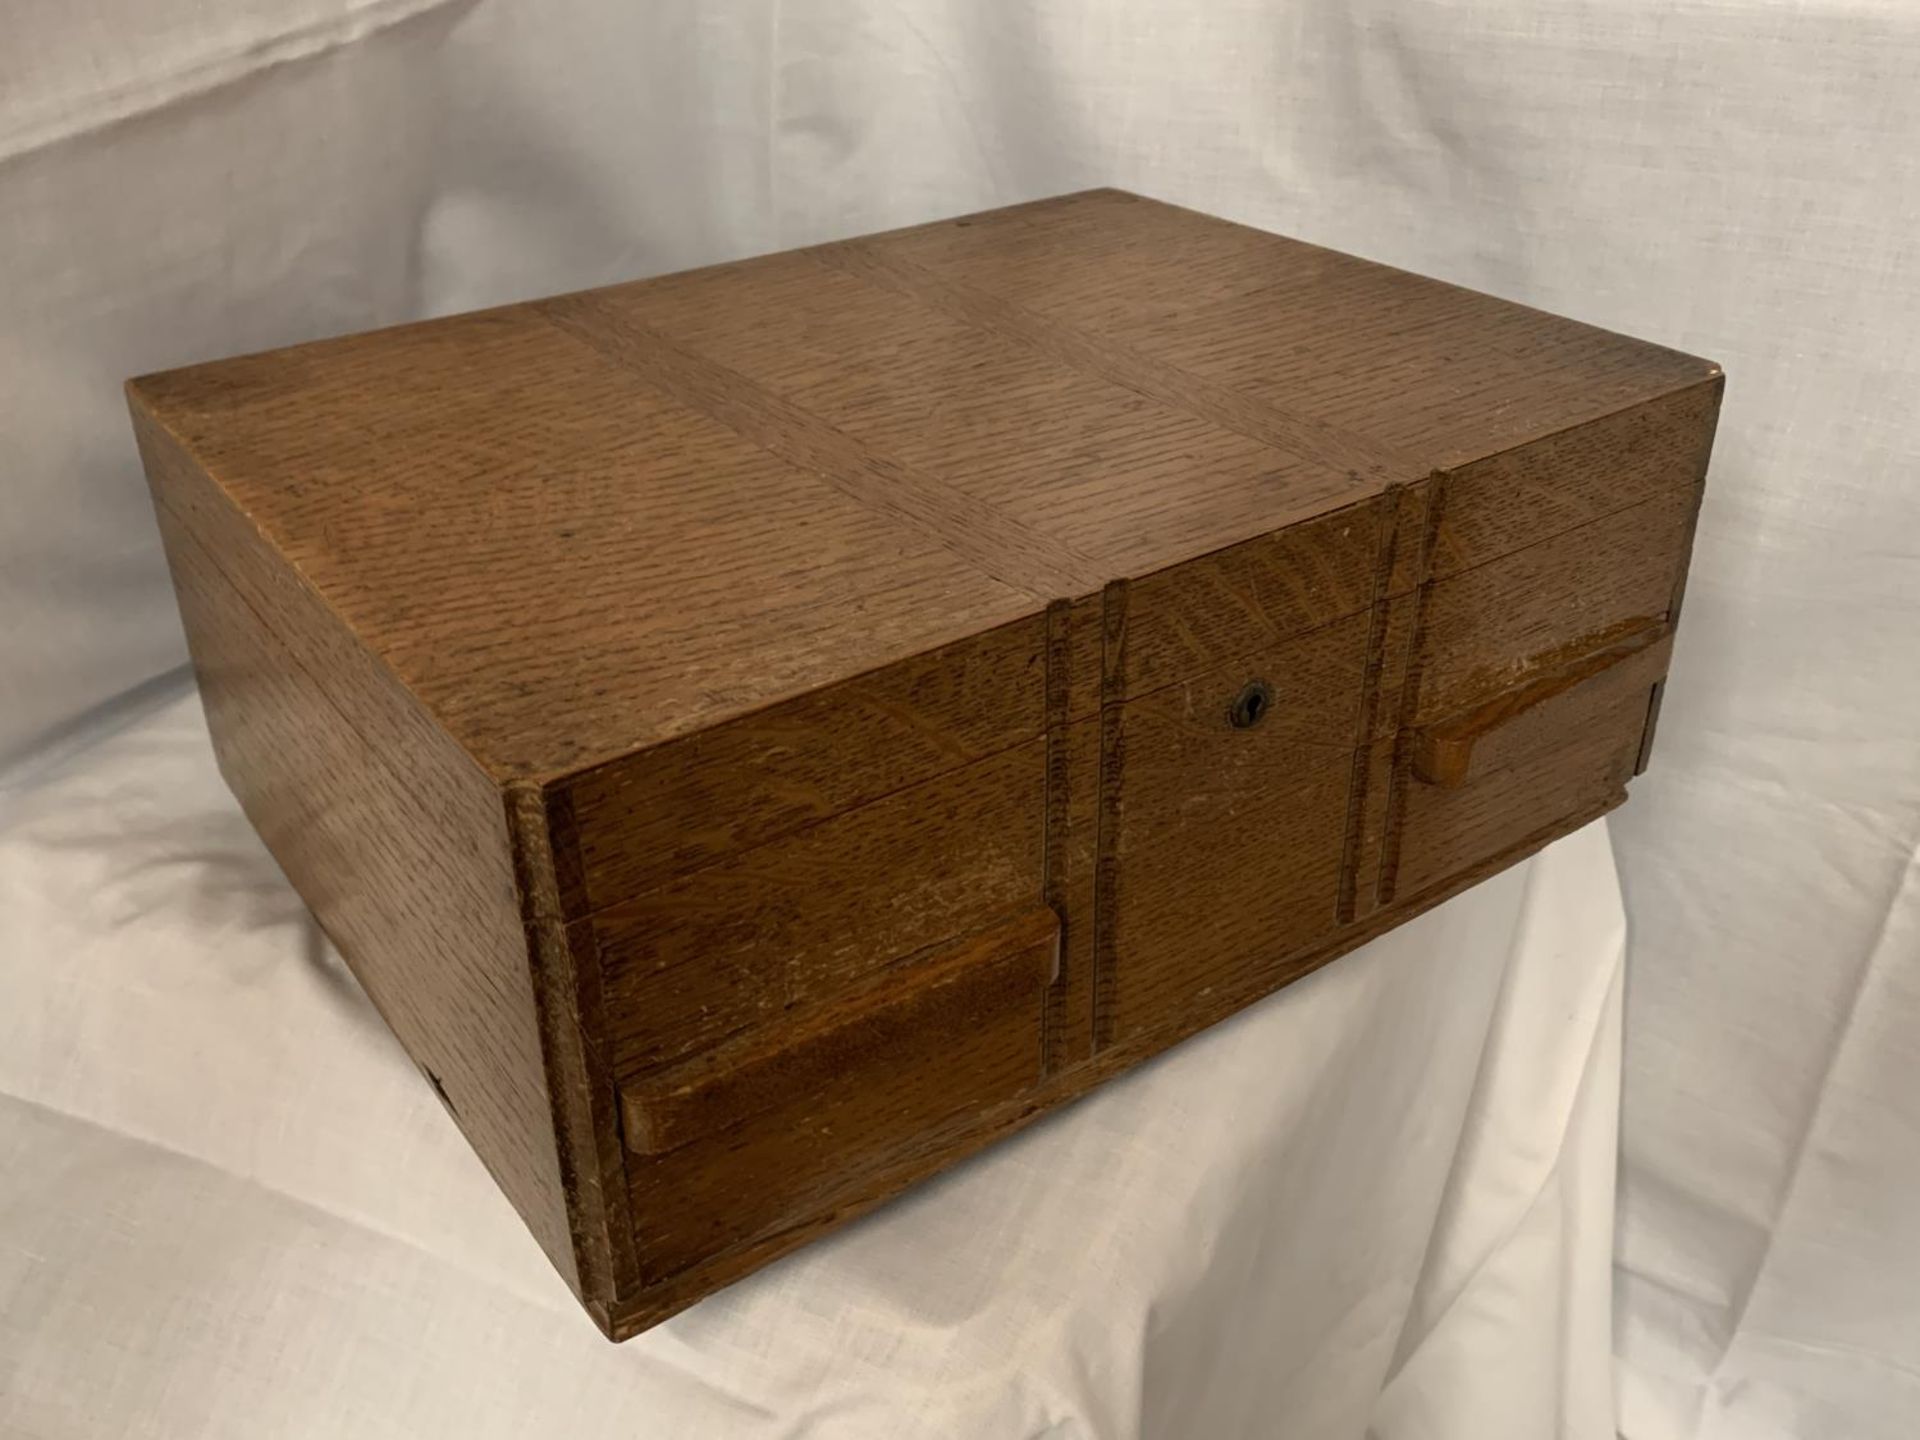 A LARGE OAK BOX WITH WOODEN CROSSBANDING DETAIL CONTAINING SILVER PLATE FLATWARE (TWELVE PLACE - Image 5 of 5